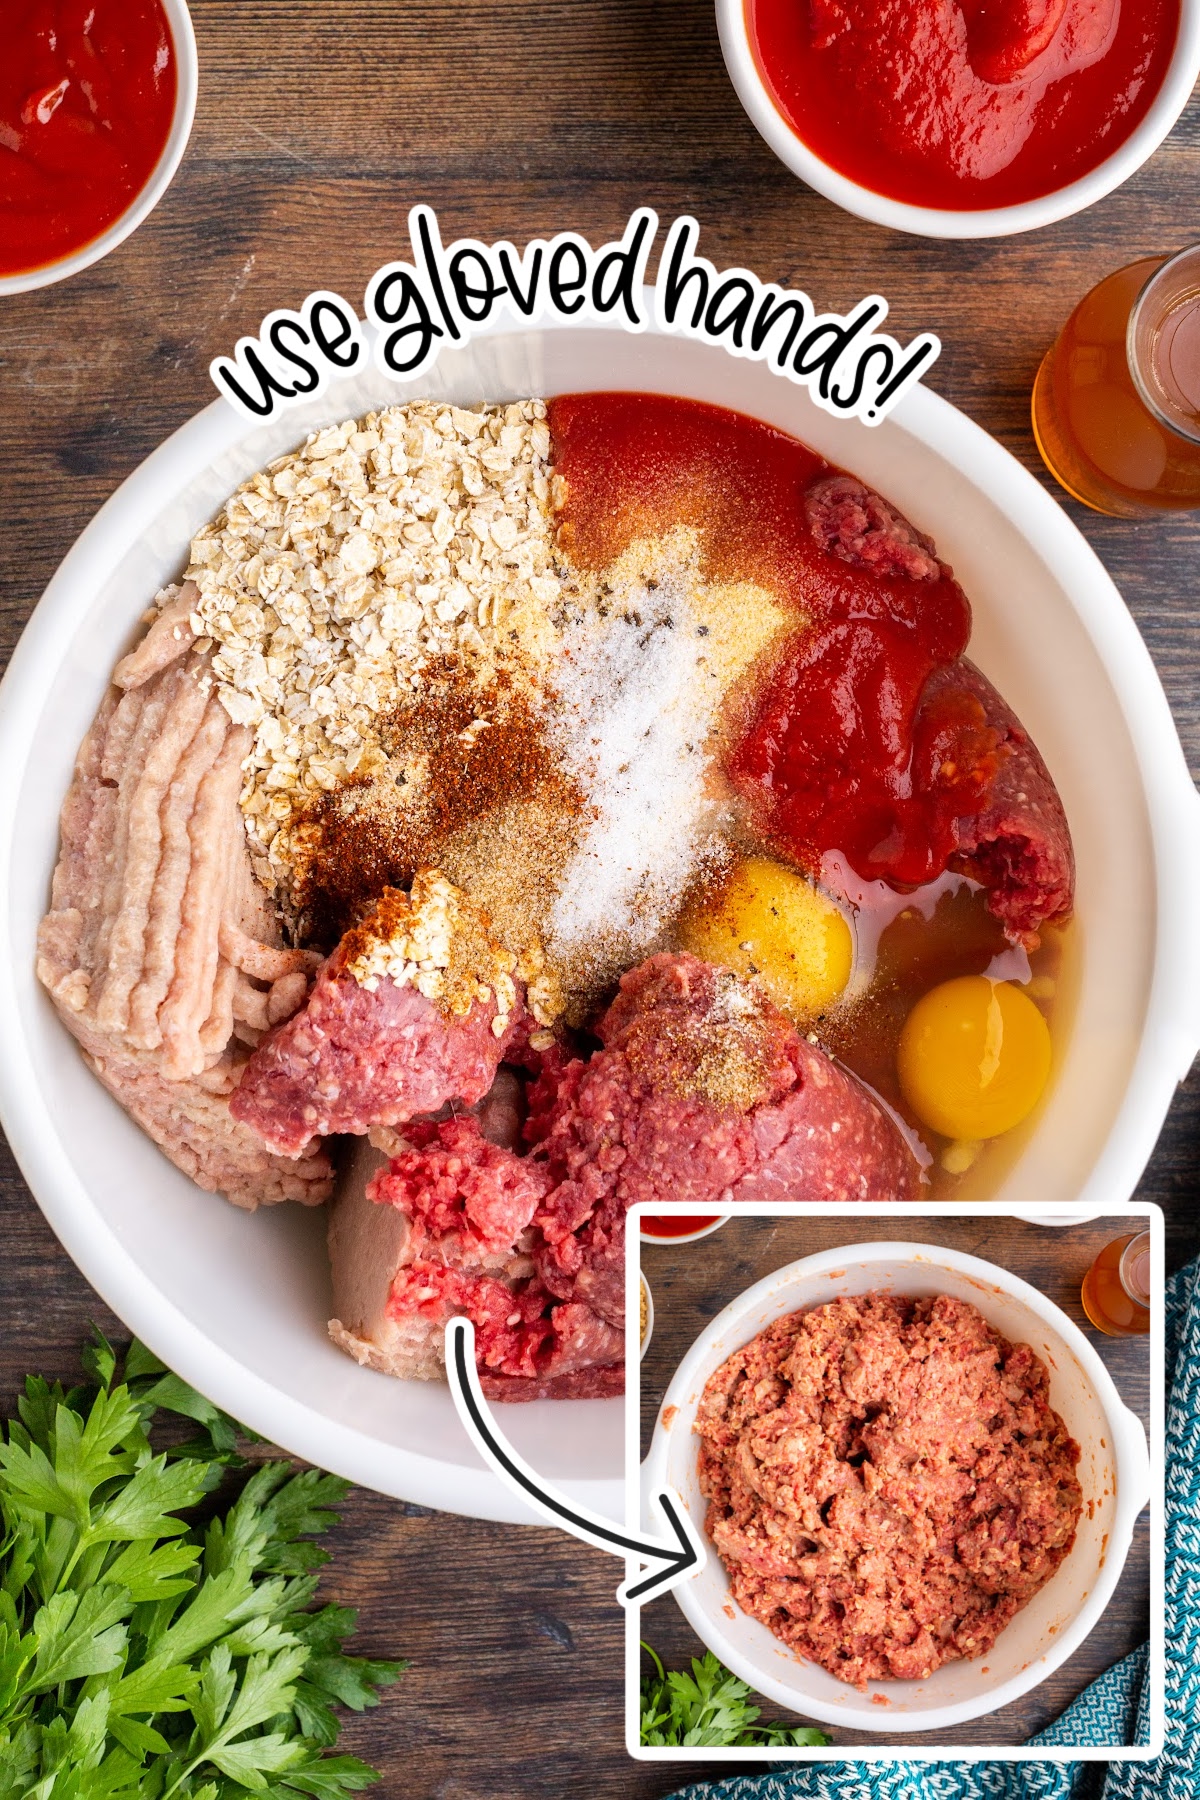 Ingredients added to a mixing bowl and an image of meat after it has been mixed with text overlay.